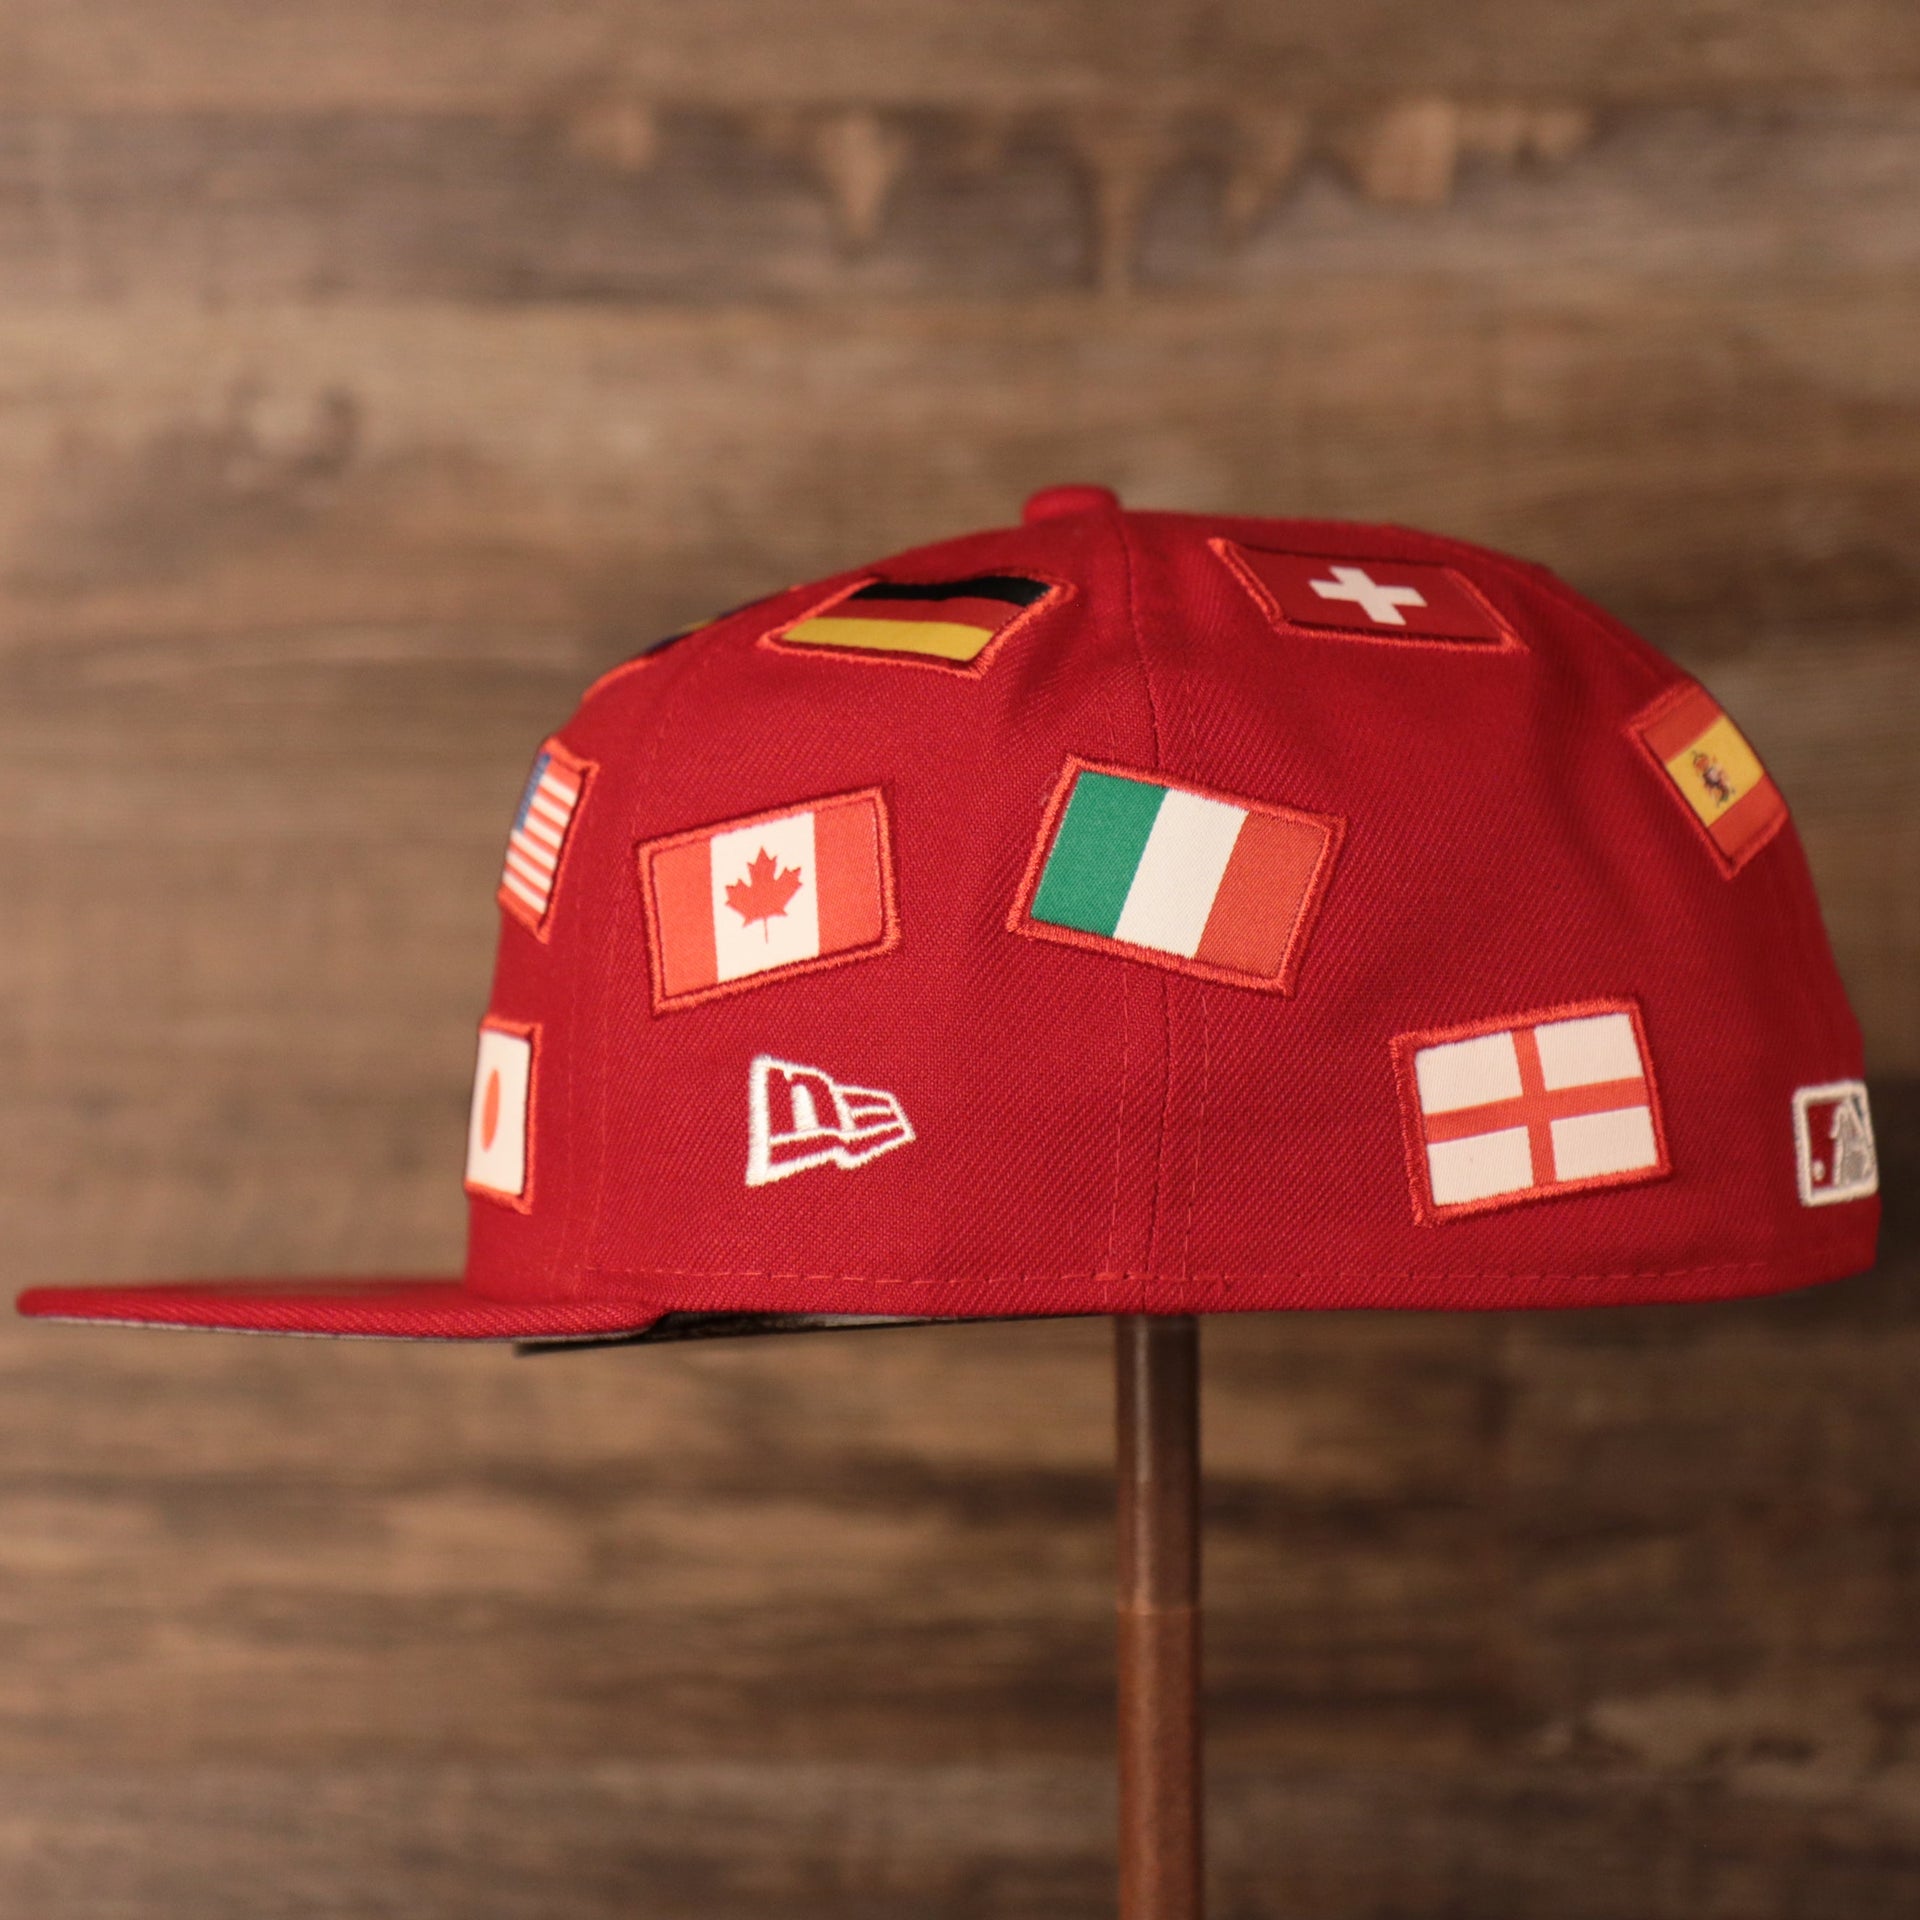 the wearers left side has the flags from the countries of Canada, Germany, and Italy Phillies World Flags Gray Bottom Fitted Cap | Philadelphia Phillies International Flags Red Grey Under Brim Fitted Cap